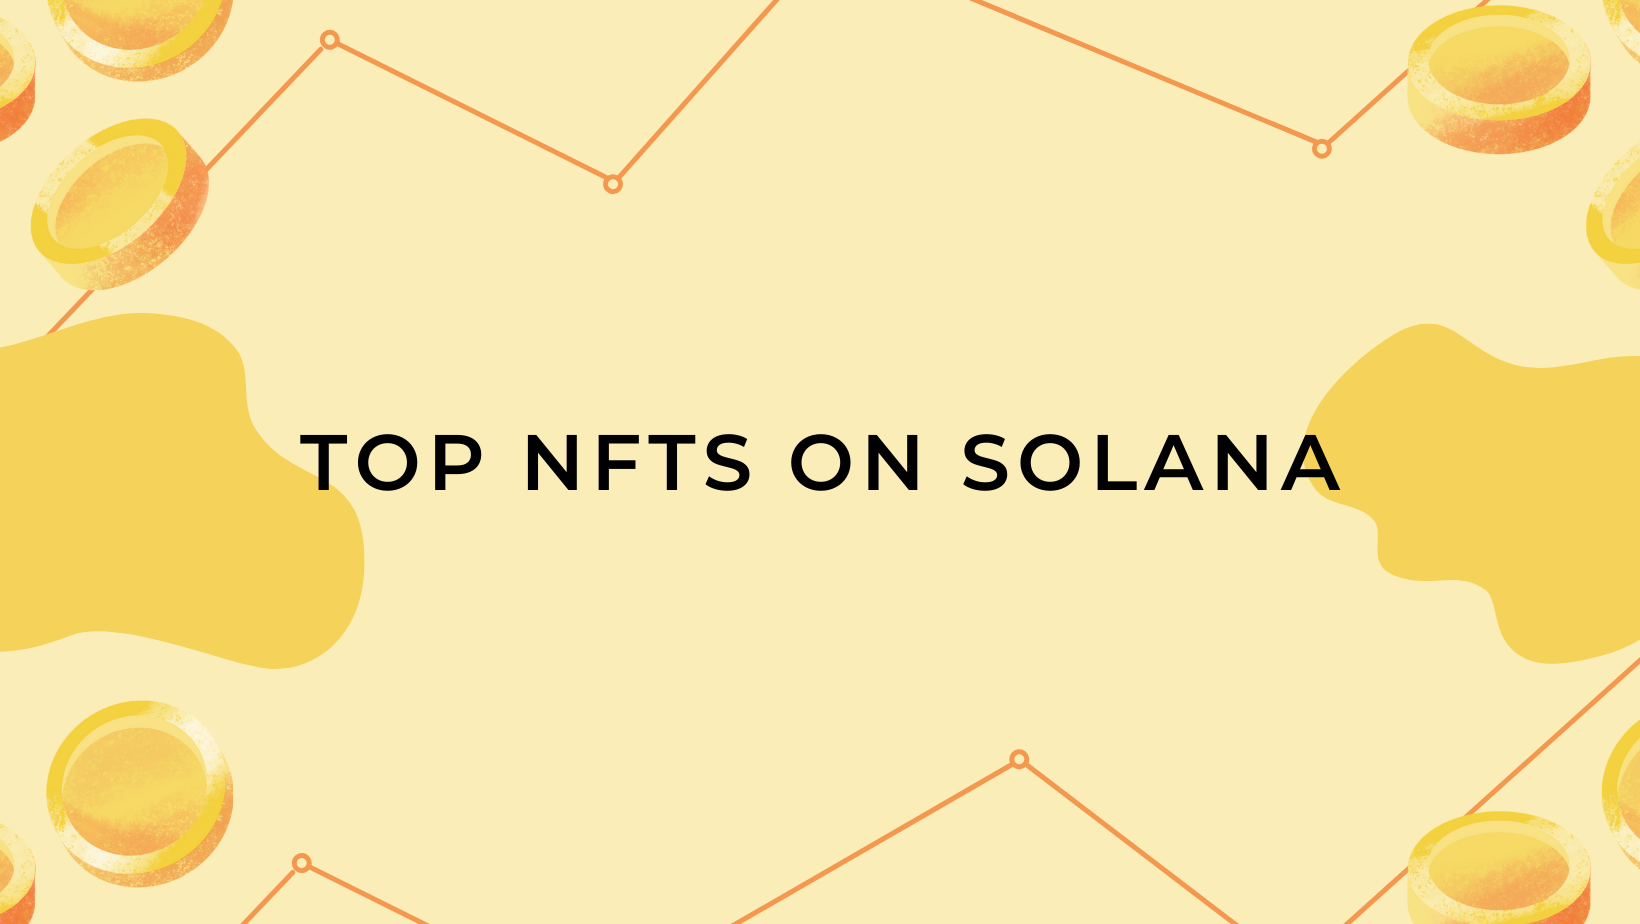 Exploring the Top NFT Projects Thriving on the Solana Foundation Ecosystem